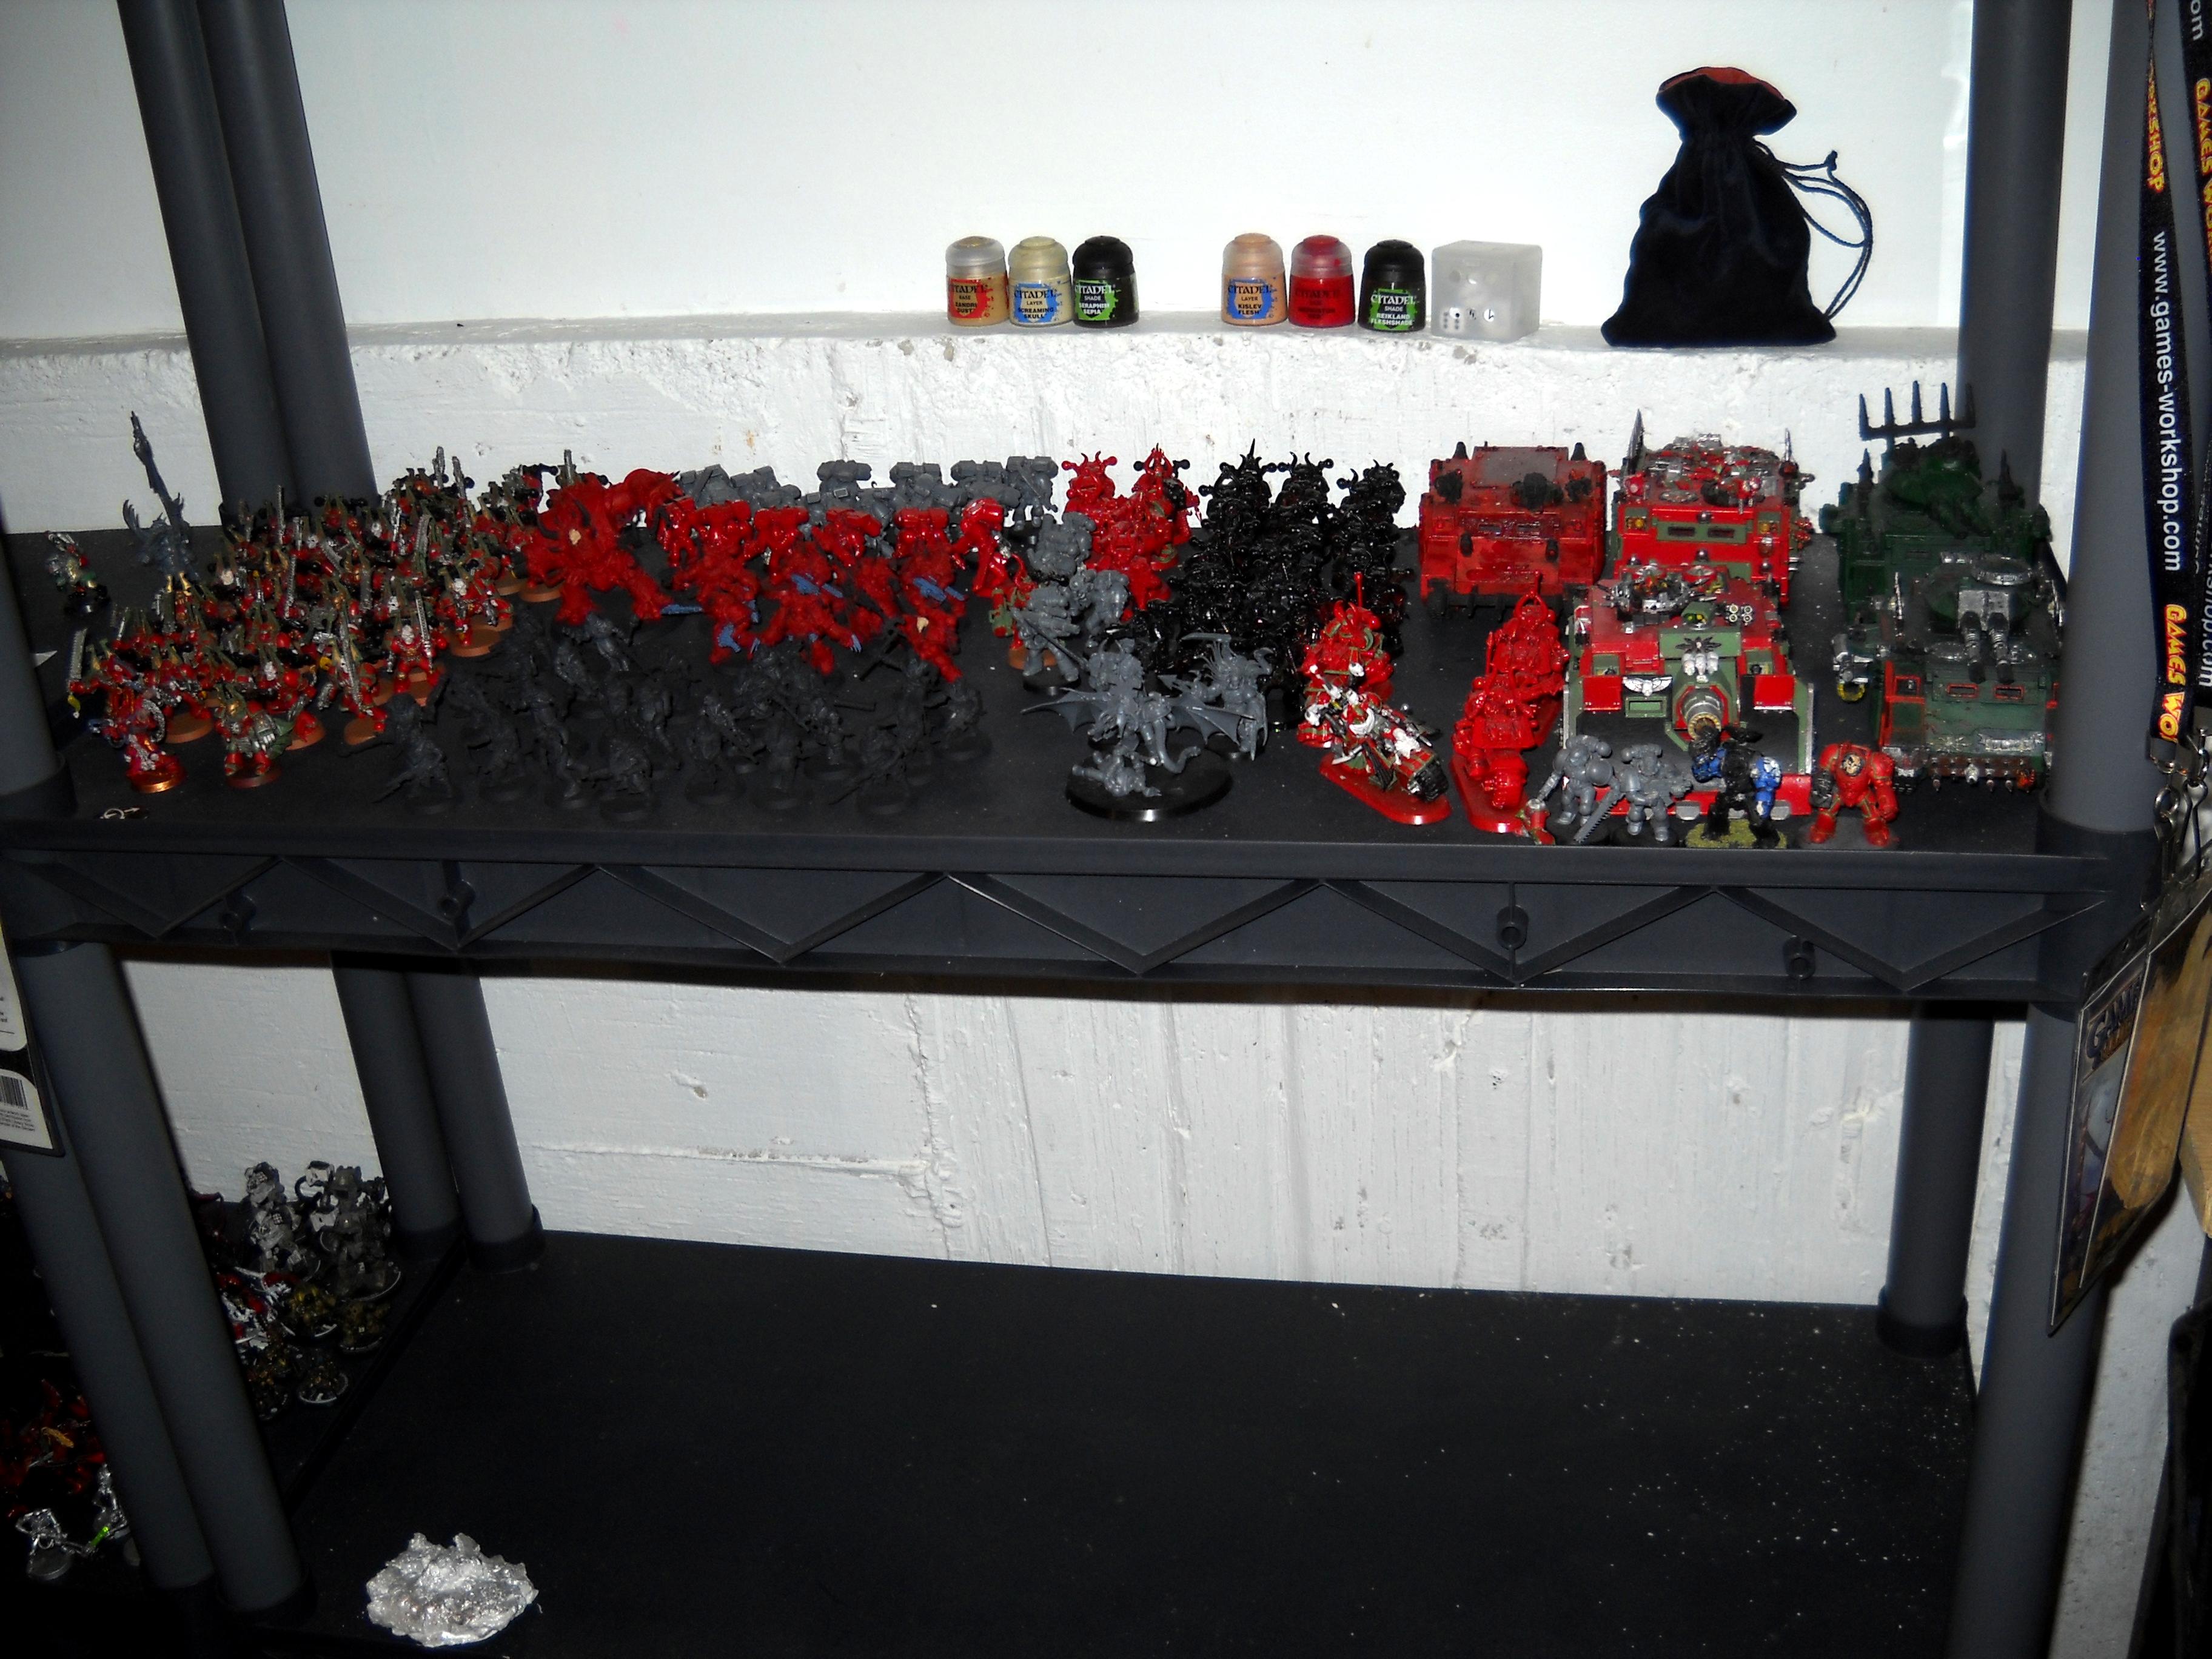 Army, Berzerker, Black Legion, Blood, Chaos, Chaos Space Marines, Cult, God, Khorne, Lord, World Eaters